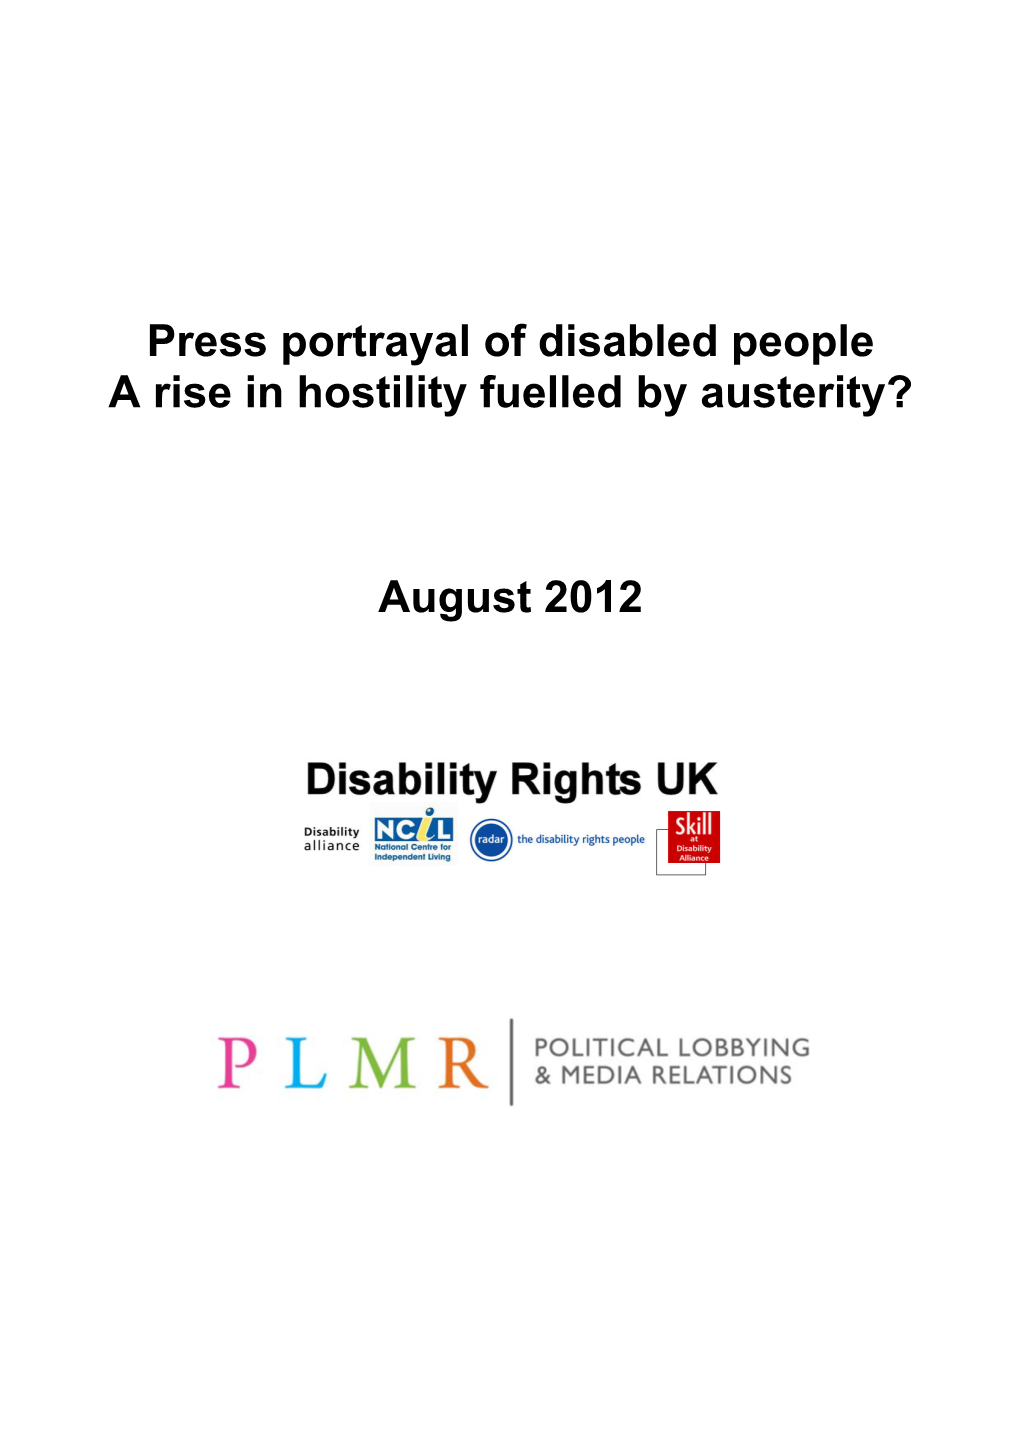 Press Portrayal of Disabled People: a Rise in Hostility Fuelled by Austerity